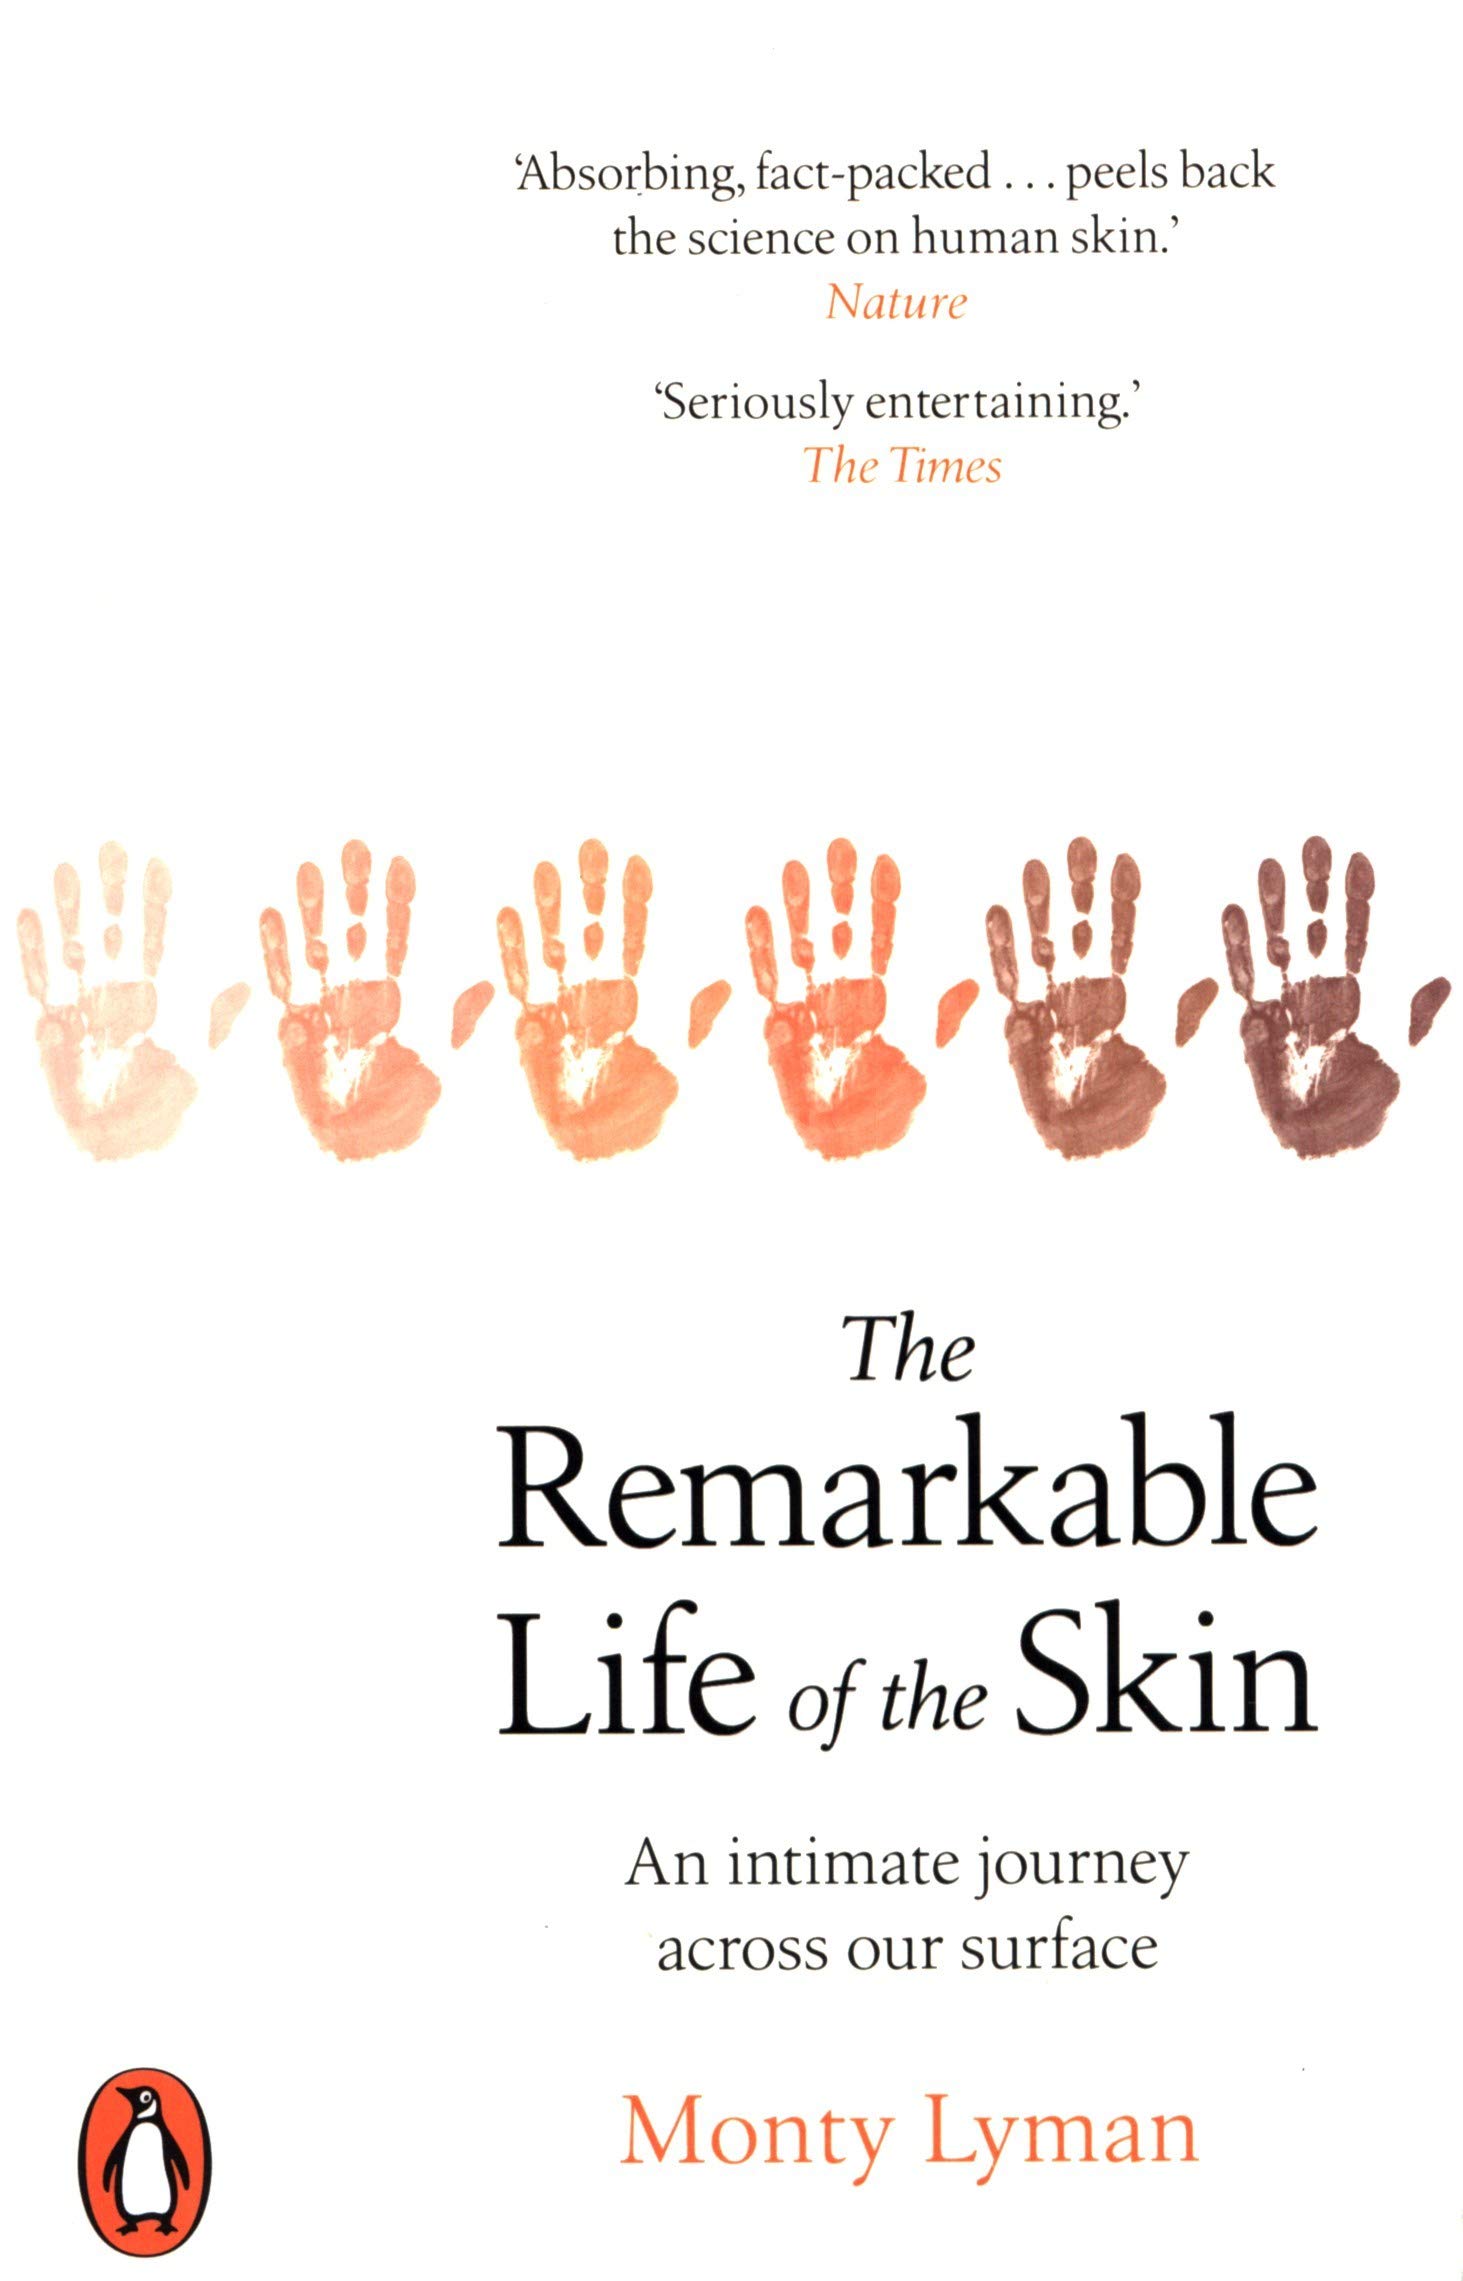 Remarkable Life of the Skin | Monty Lyman